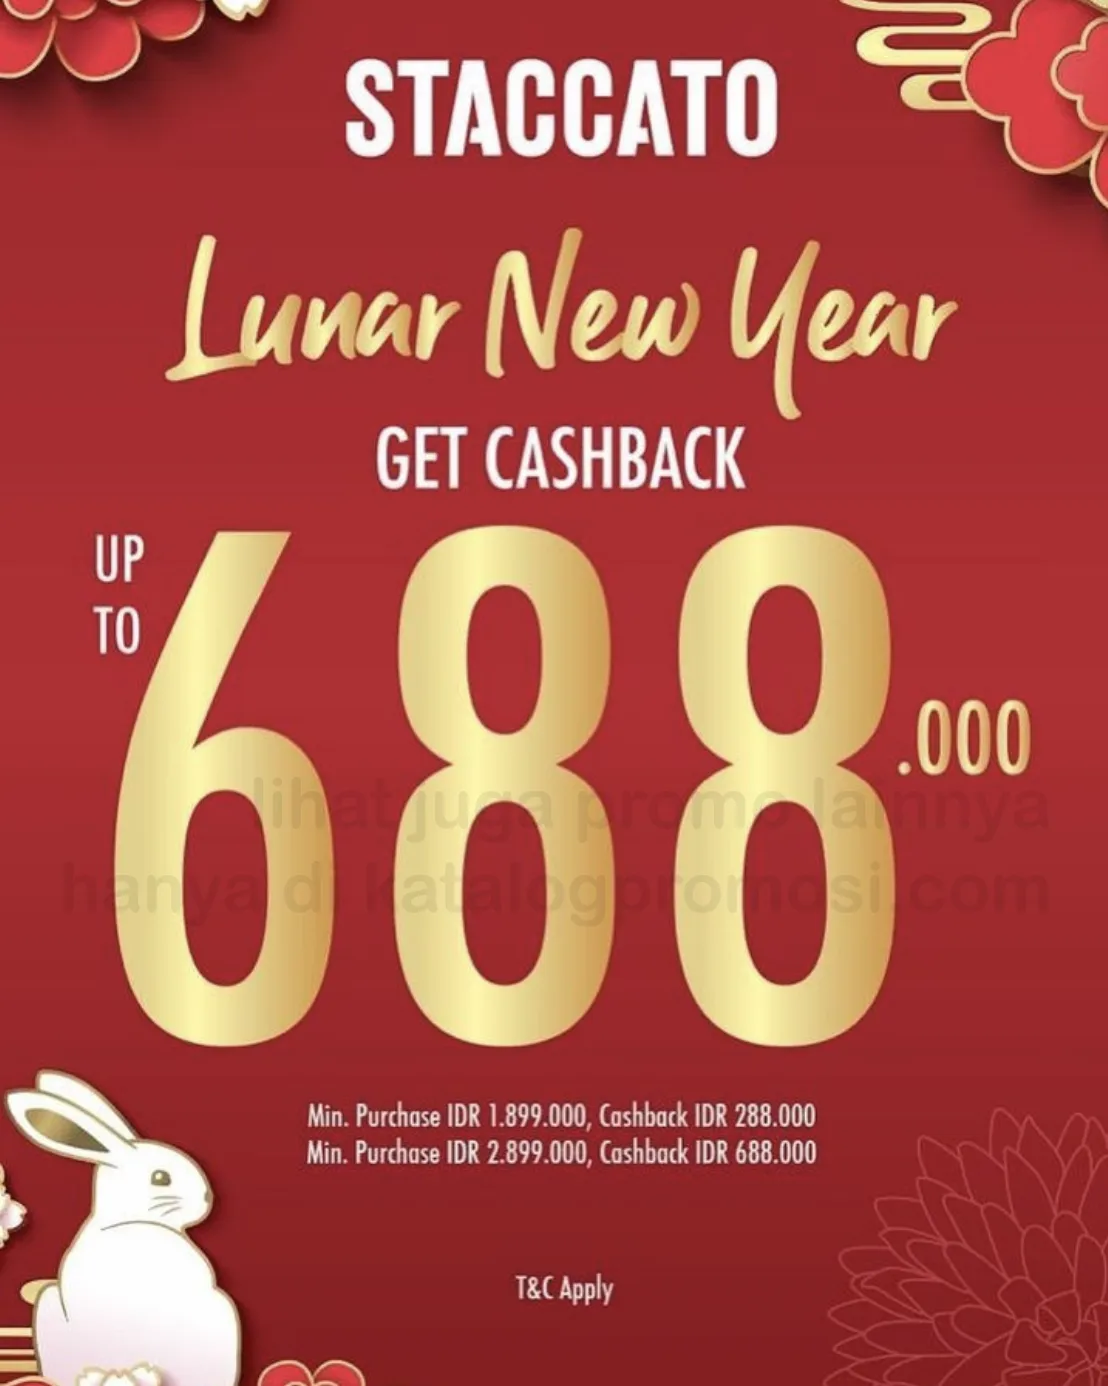 Promo STACCATO LUNAR NEW YEAR SPECIAL - GET VOUCHER up to Rp. 688.000